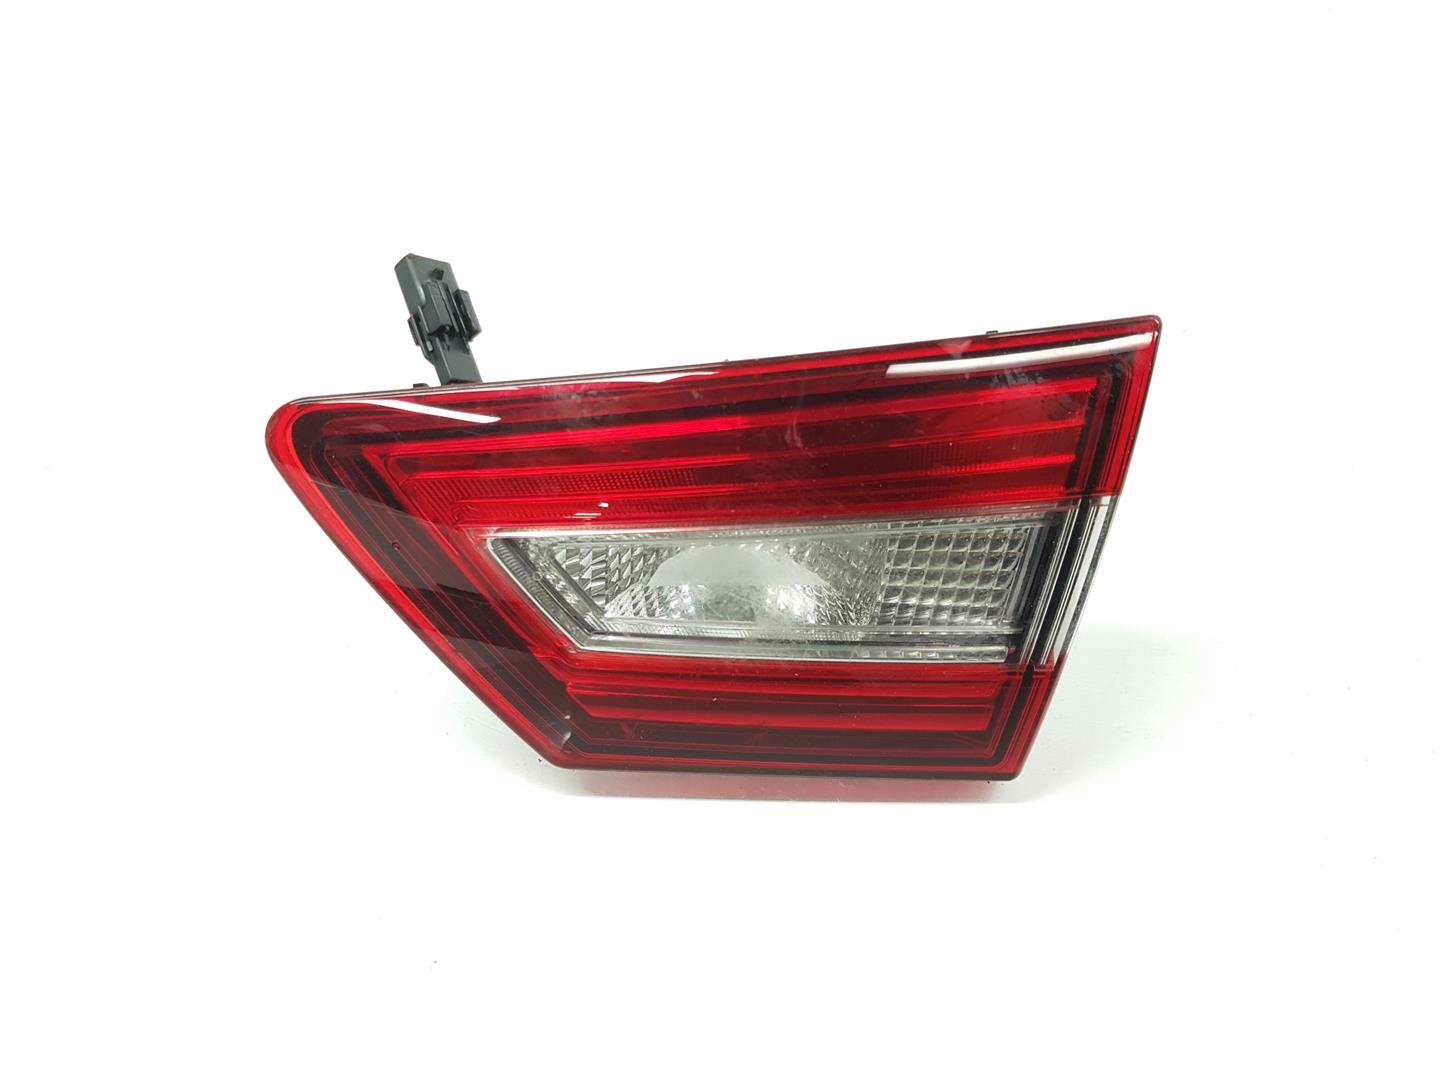 RENAULT Clio 4 generation (2012-2020) Rear Right Taillight Lamp 265505796R, 265505796R 24234378